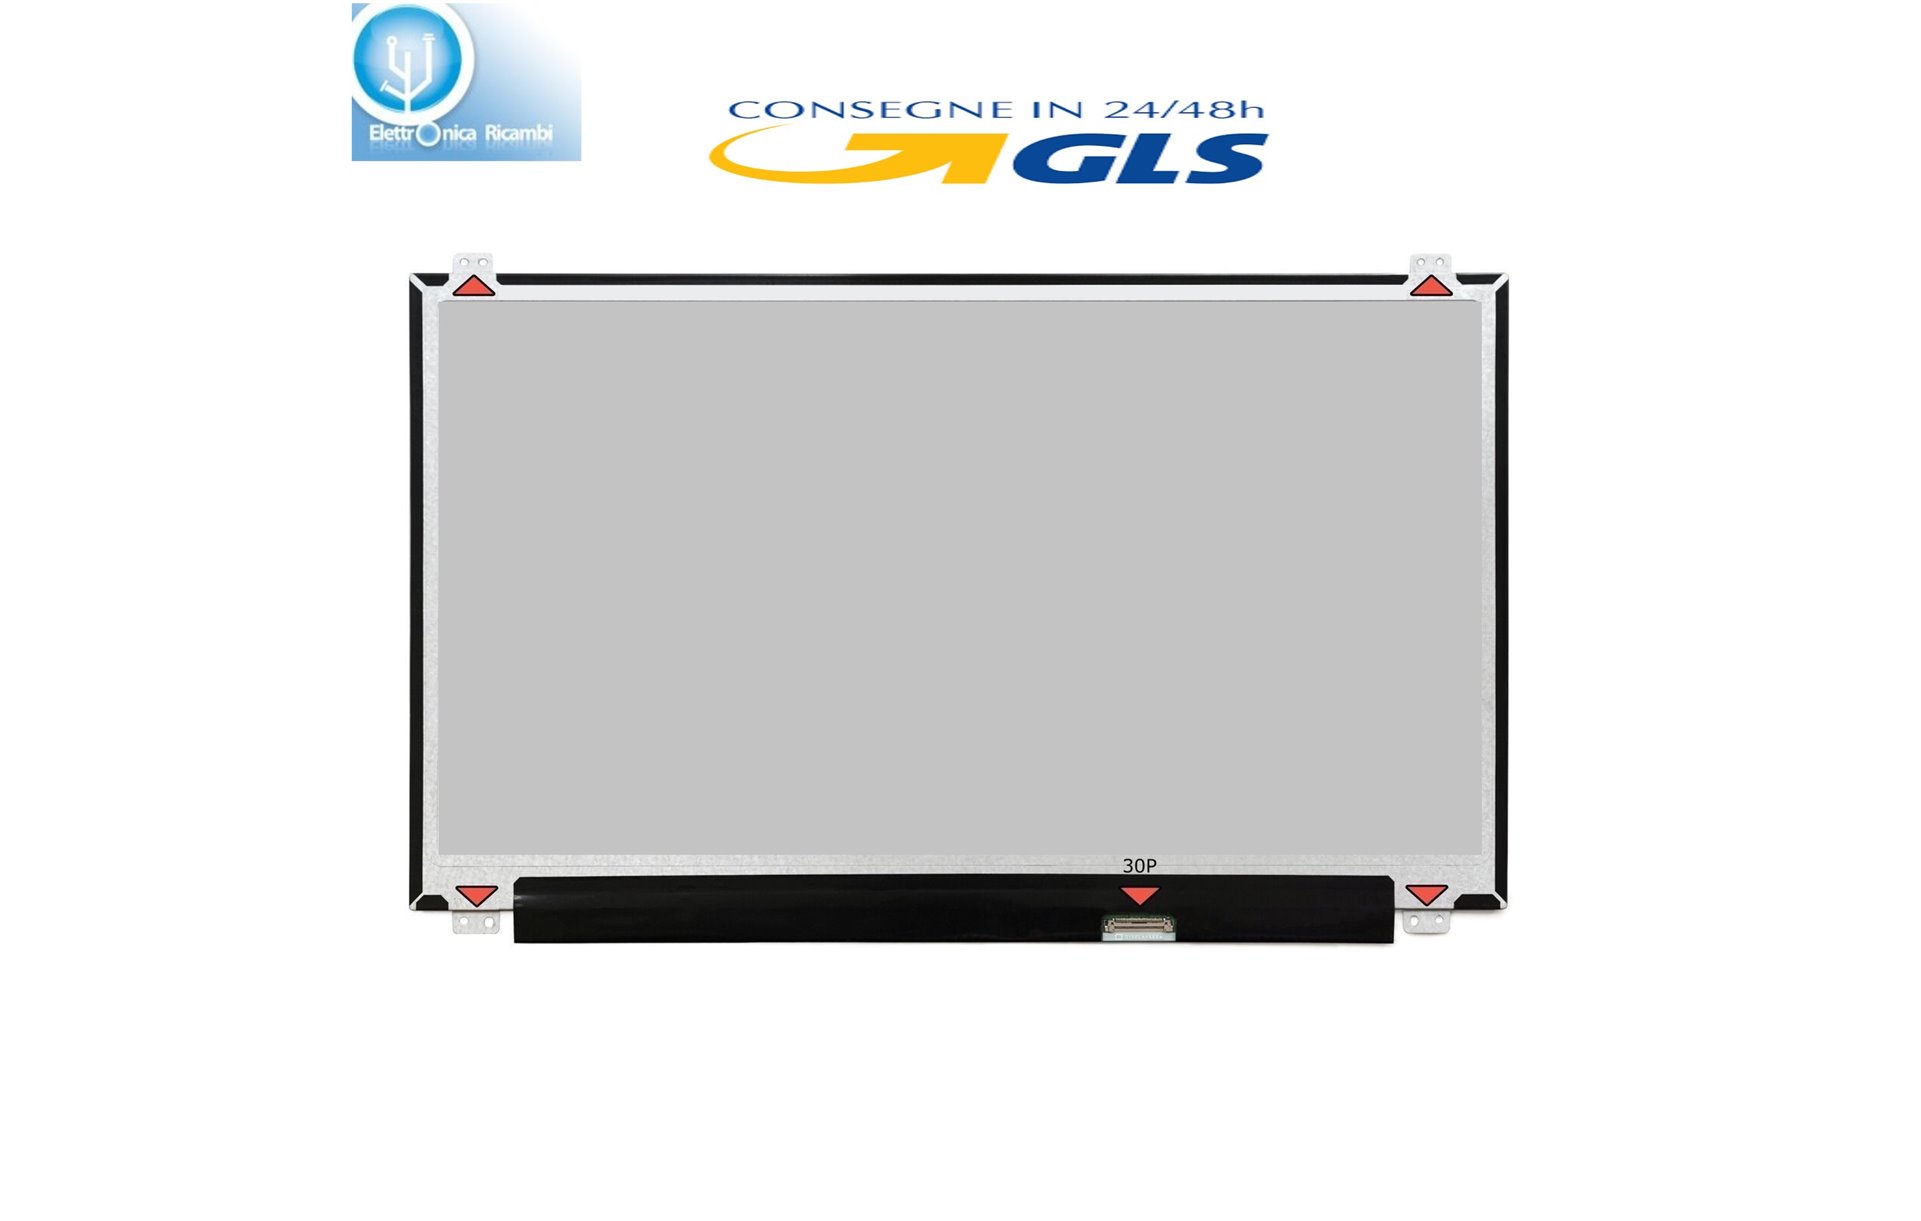 Display LCD PACKARD BELL EASYNOTE TE69 SERIES 15,6 LED 1366X768 30 PIN